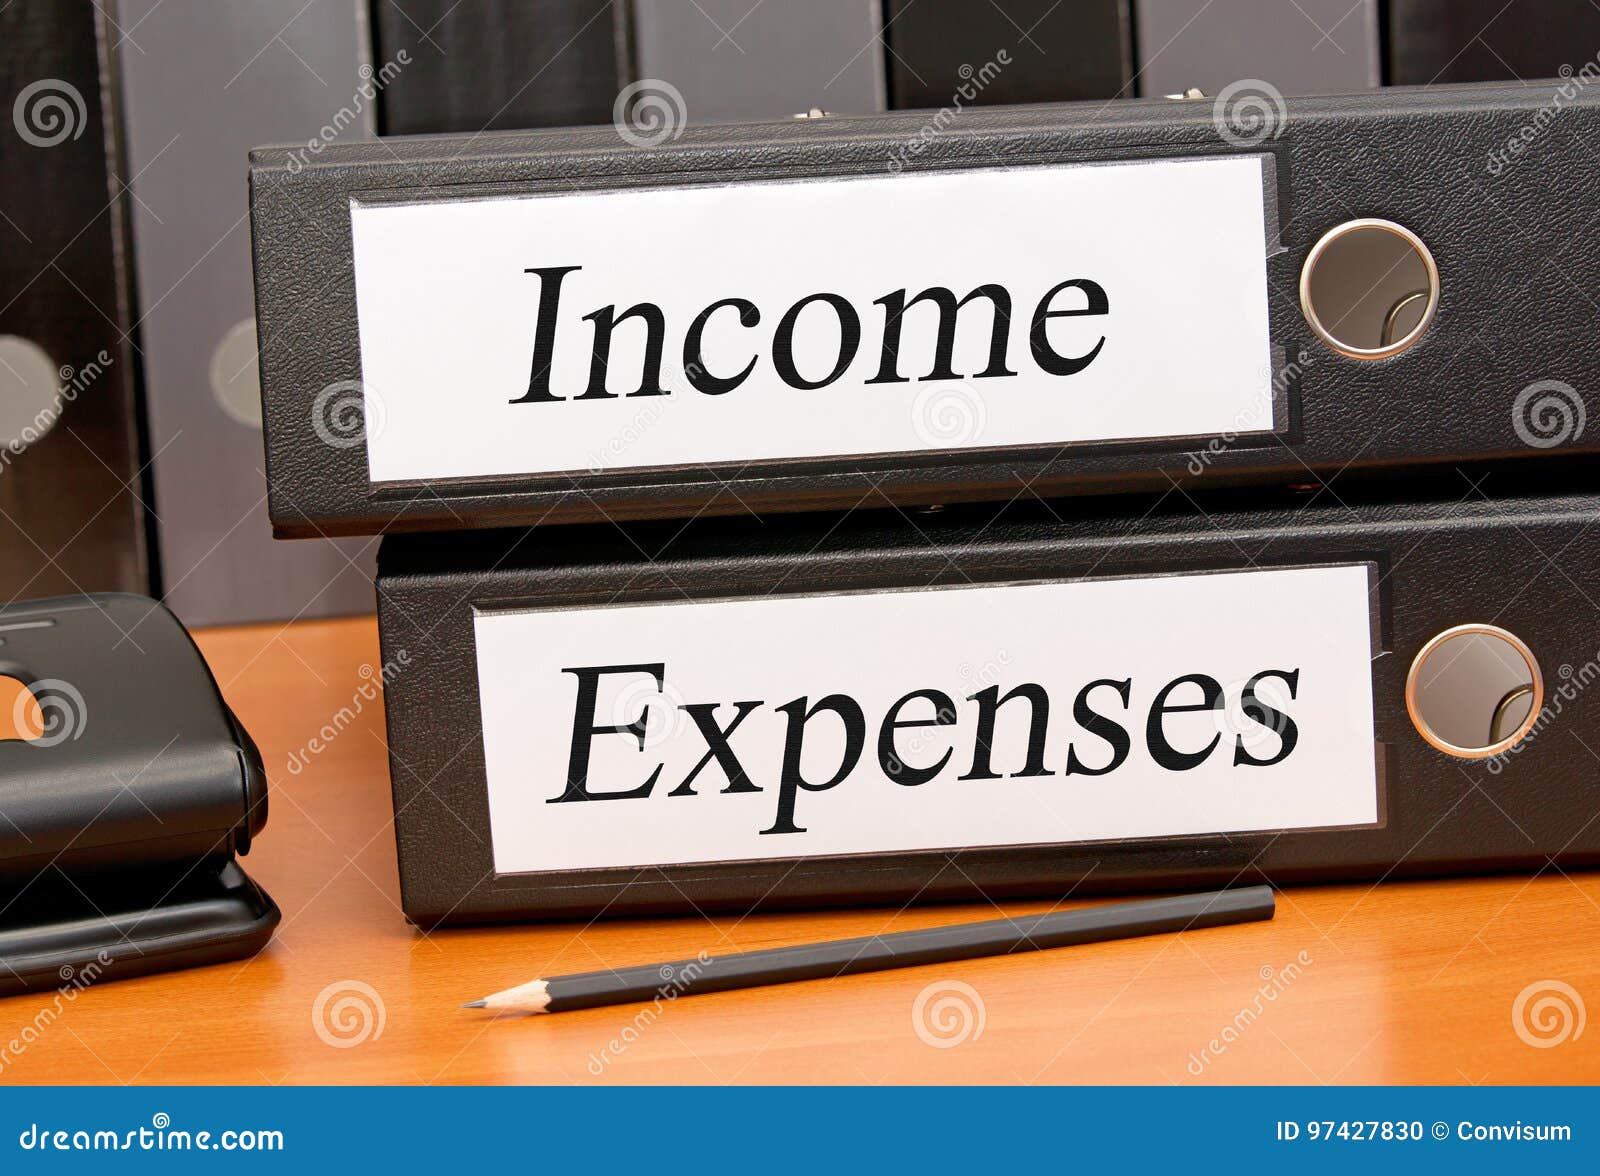 income and expenses, two binders in the office